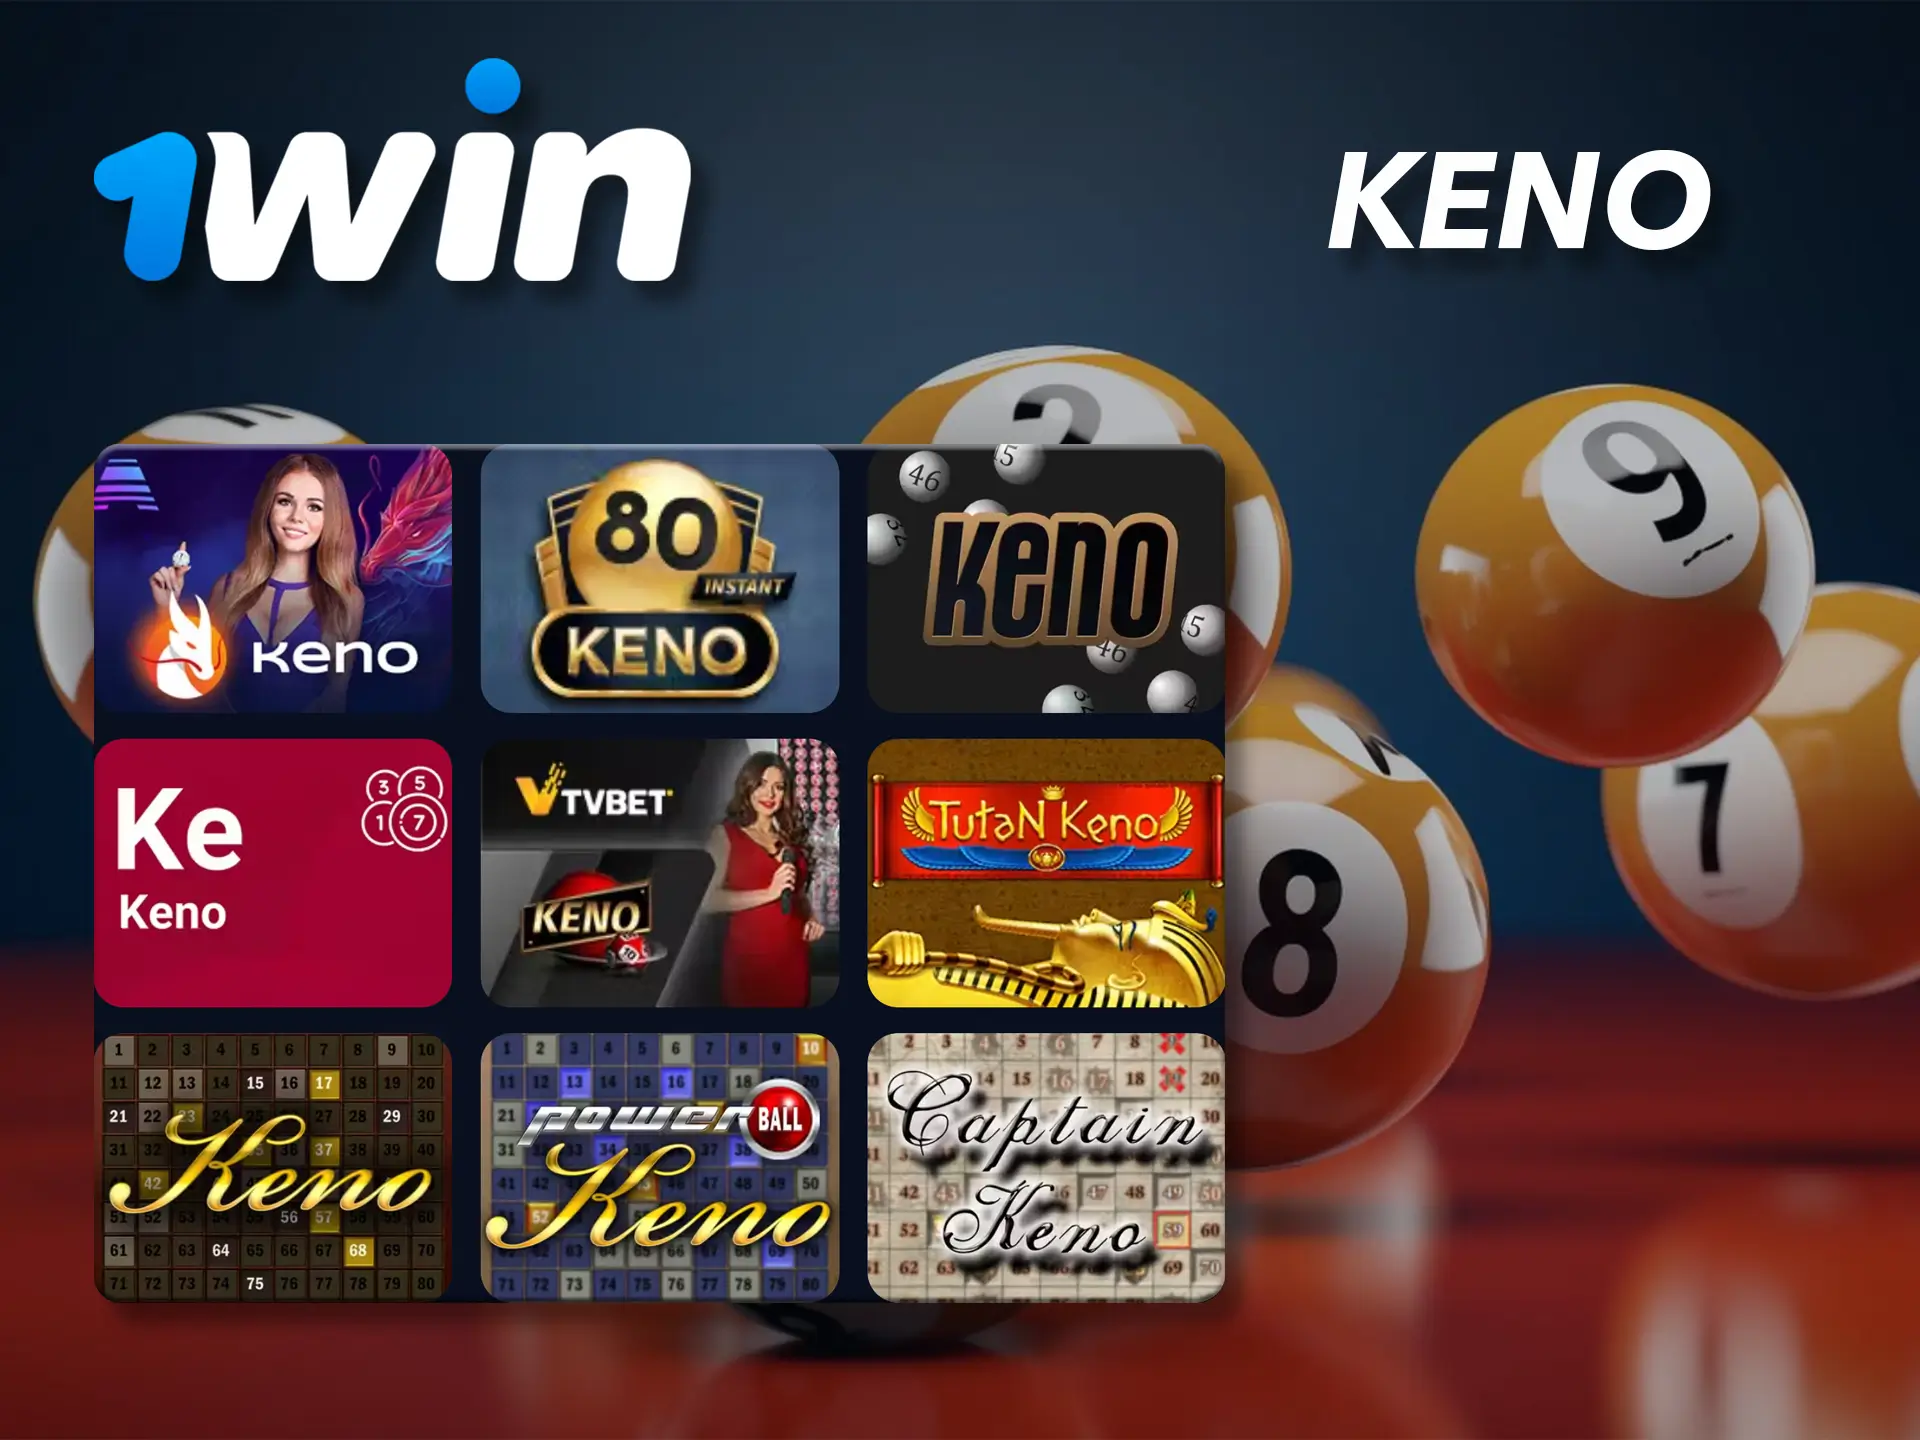 Hit the big jackpot by guessing the numbers in the keno game from 1Win Casino.